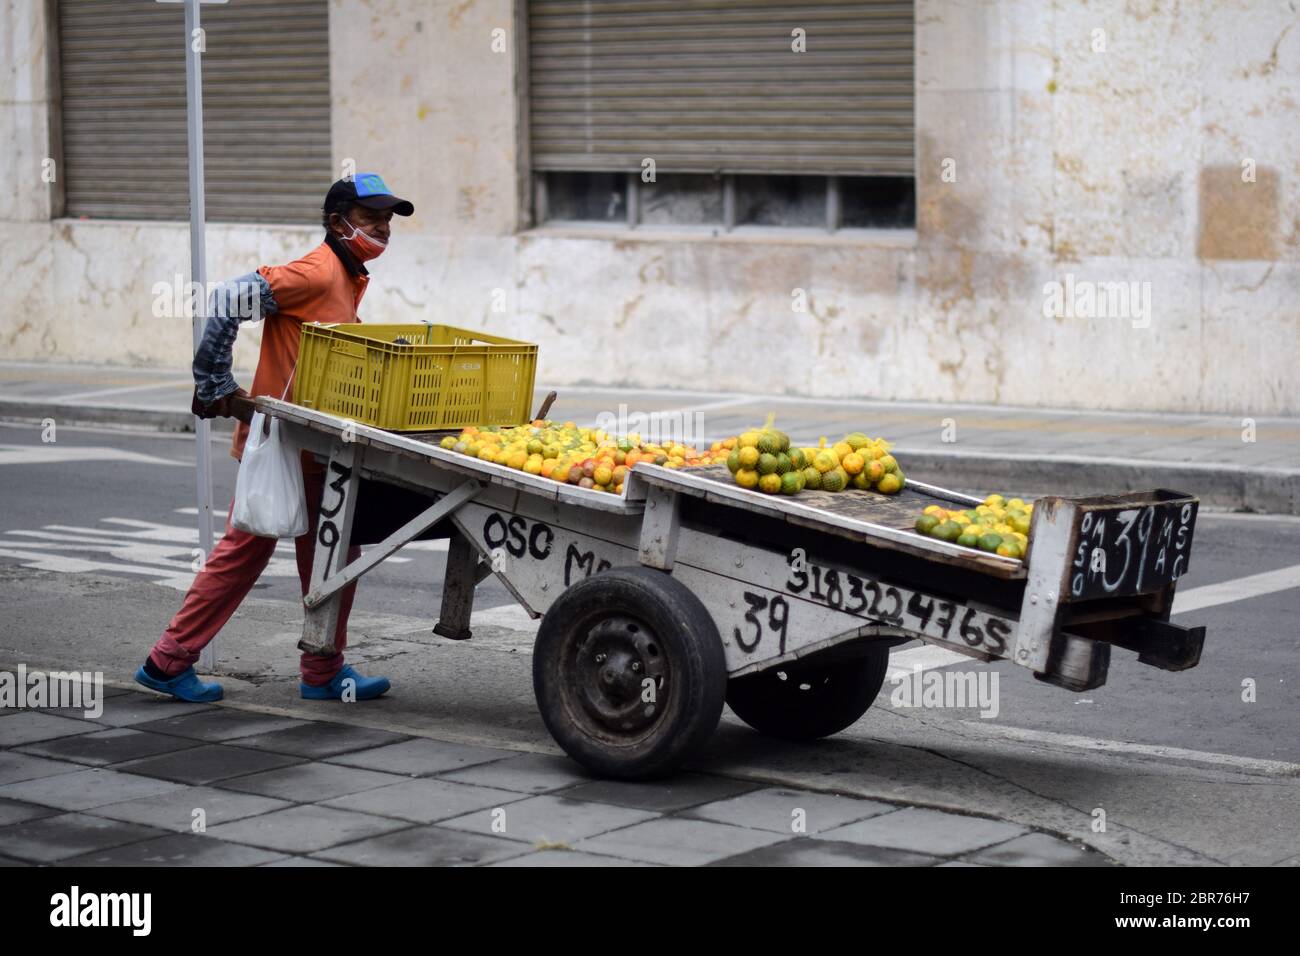 Street fruit seller working in city centre during Coronavirus outbreak in Colombia Stock Photo